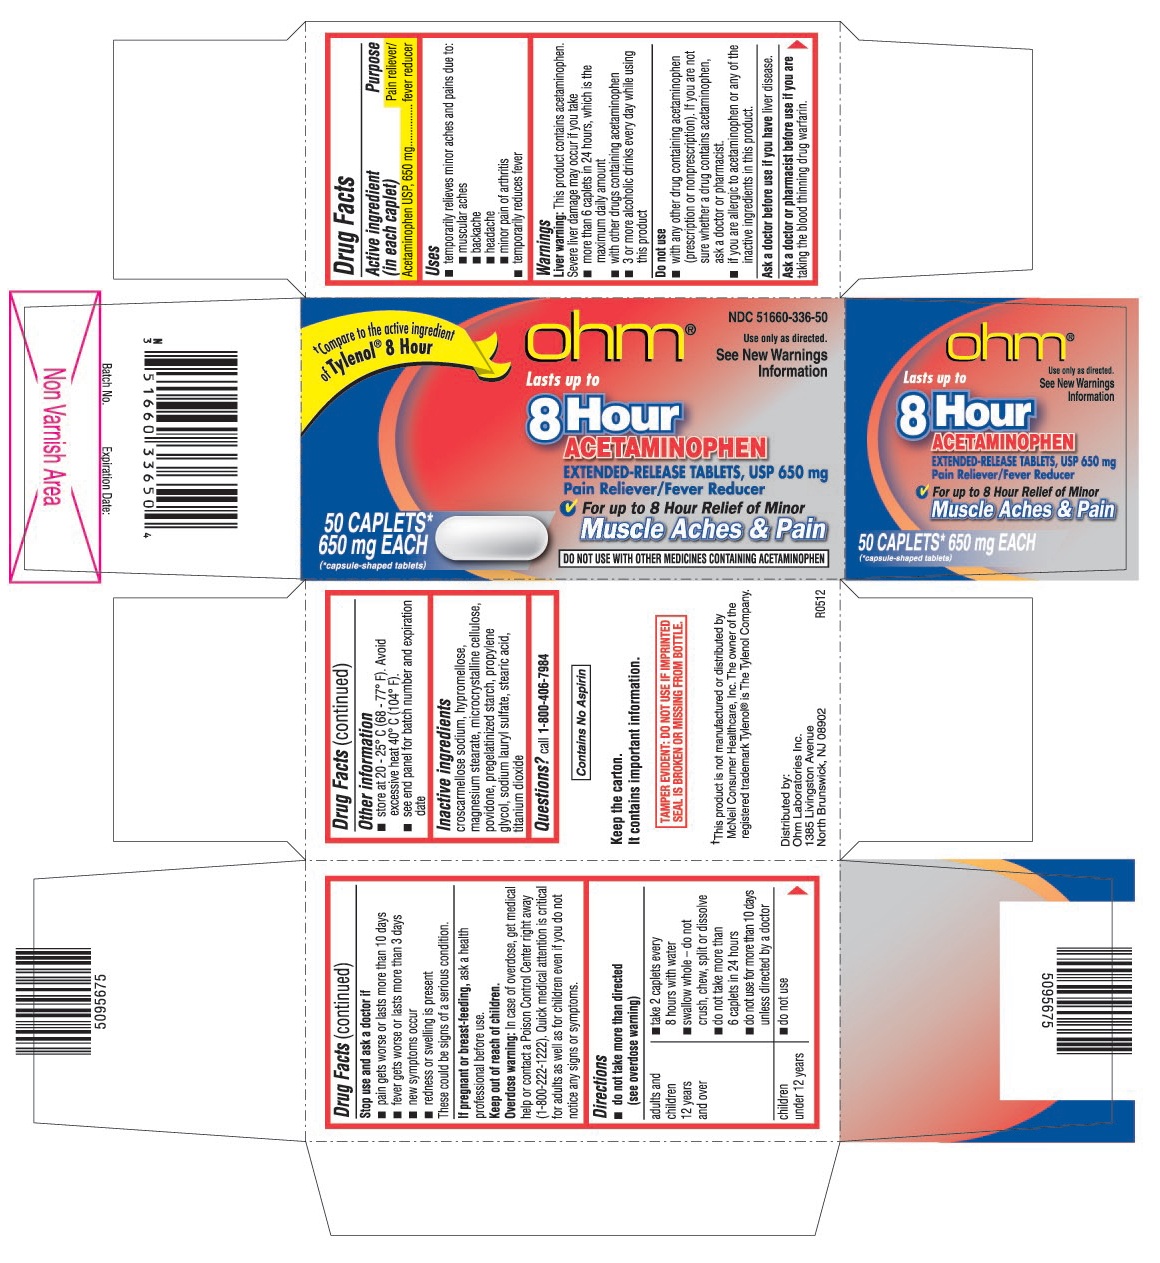 This is the 50 count bottle carton label for 8 hour, 650 mg Acetaminophen extended-release tablets, USP.